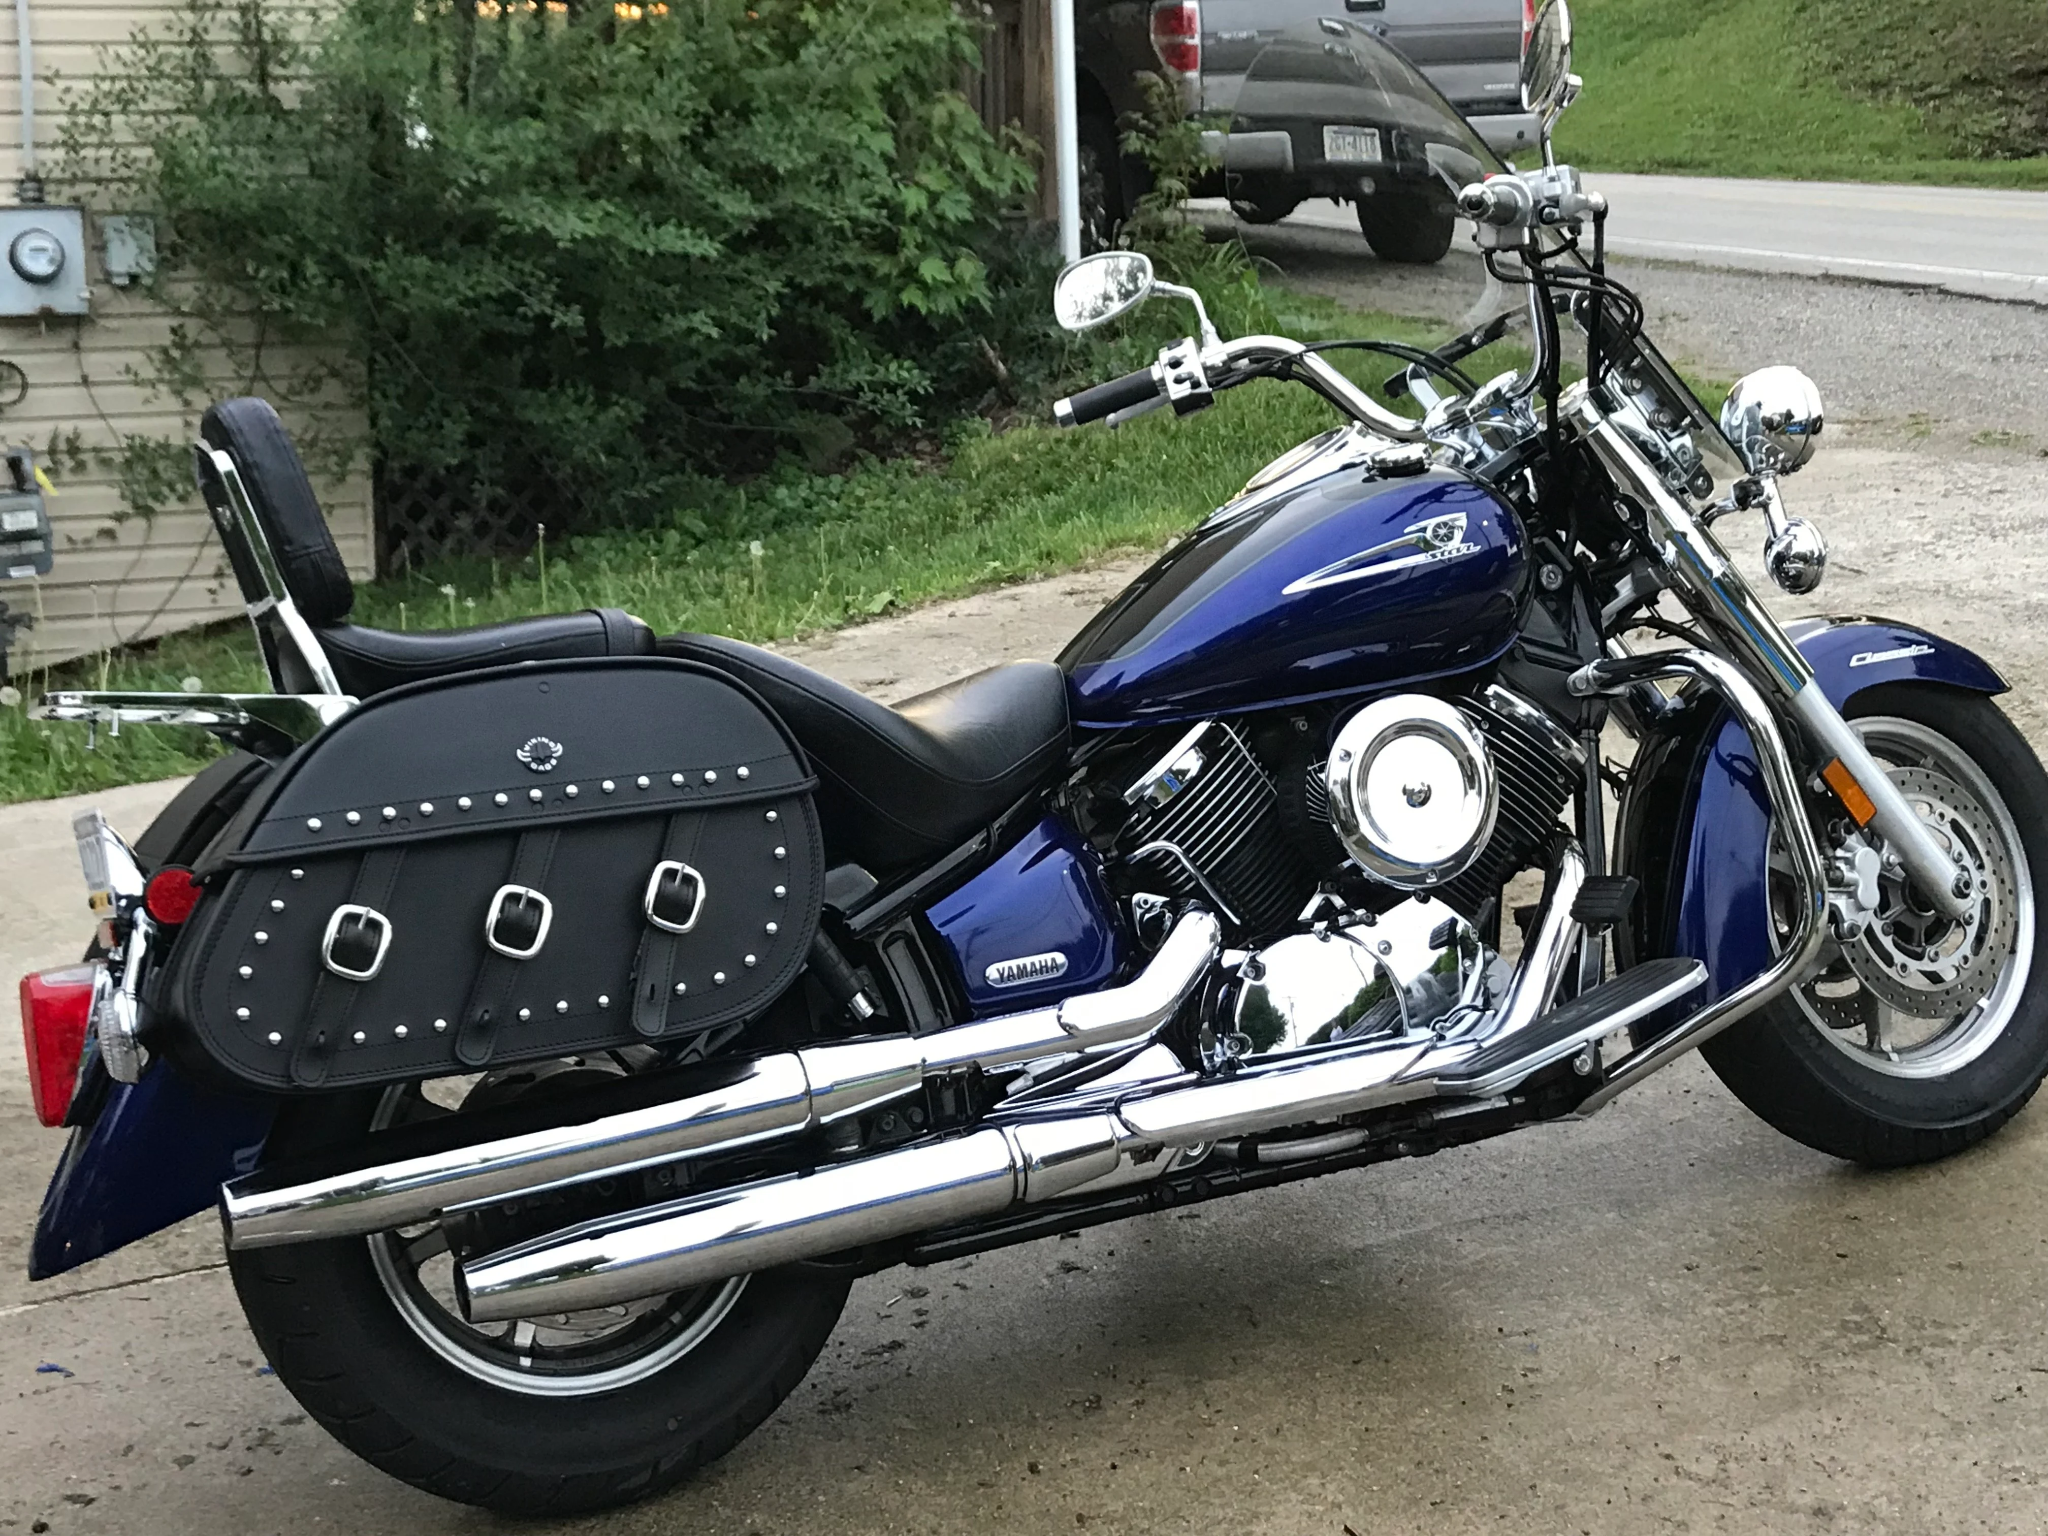 Motorcycle Luggage for Delaware Motorcycle Tour